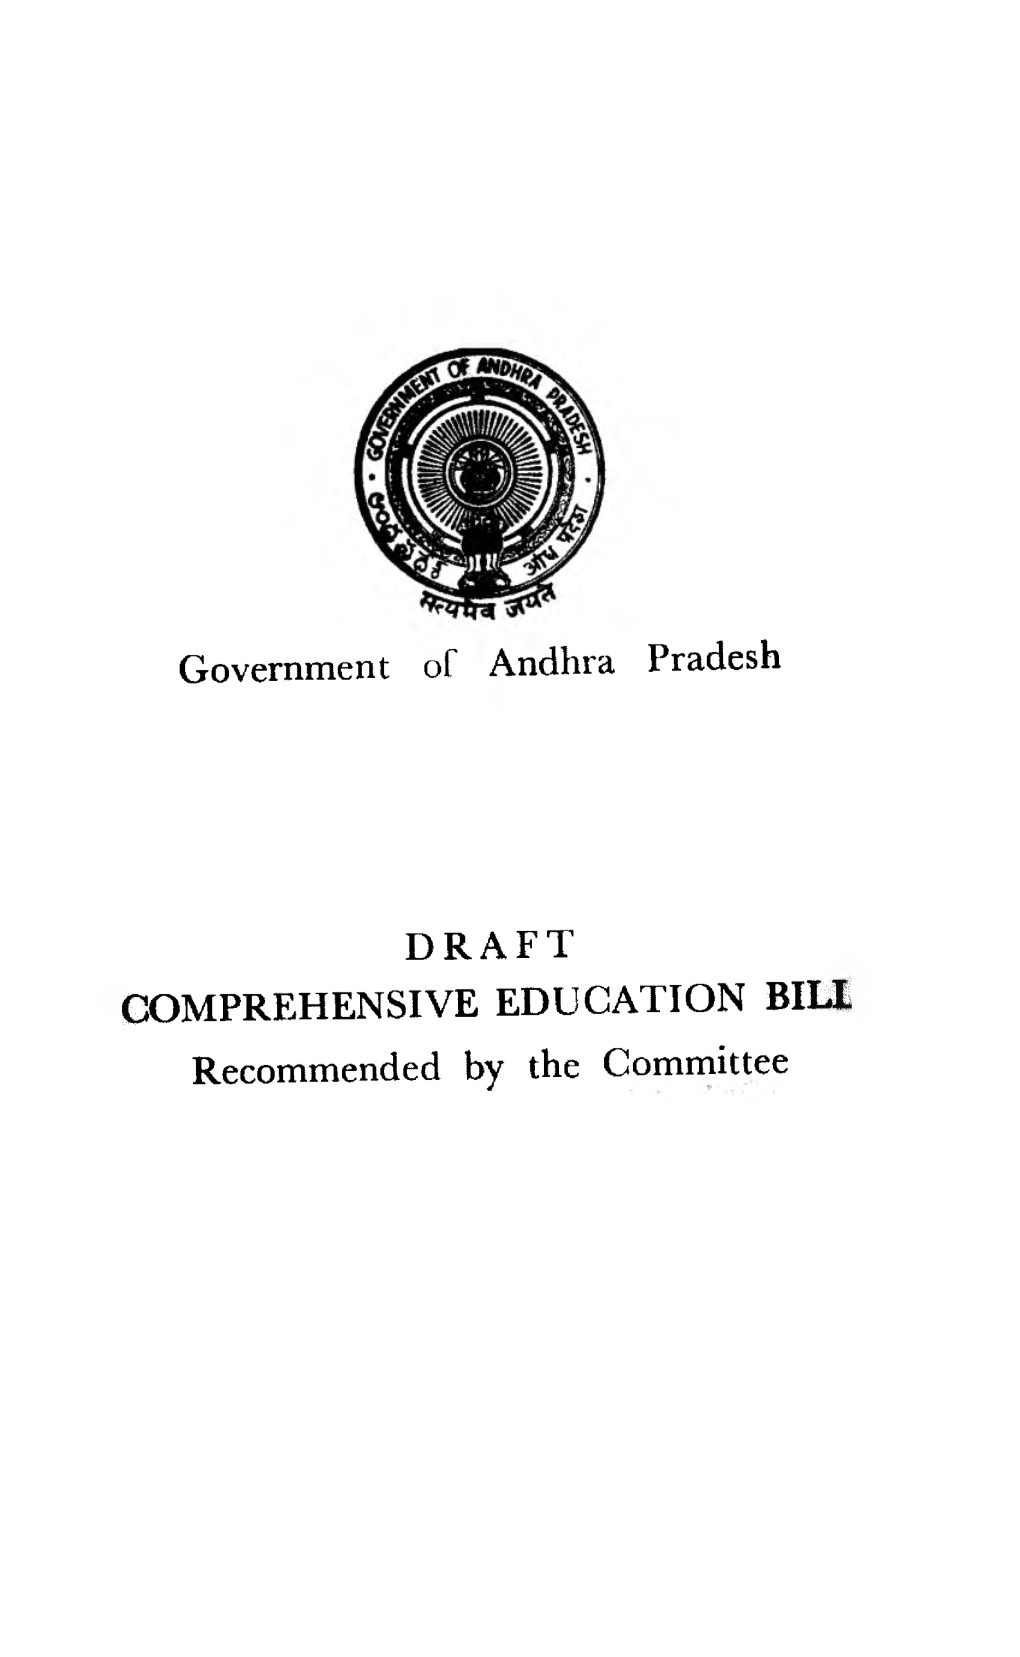 Government of Andhra Pradesh DRAFT COMPREHENSIVE EDUCATION BILL Recommended by the Committee